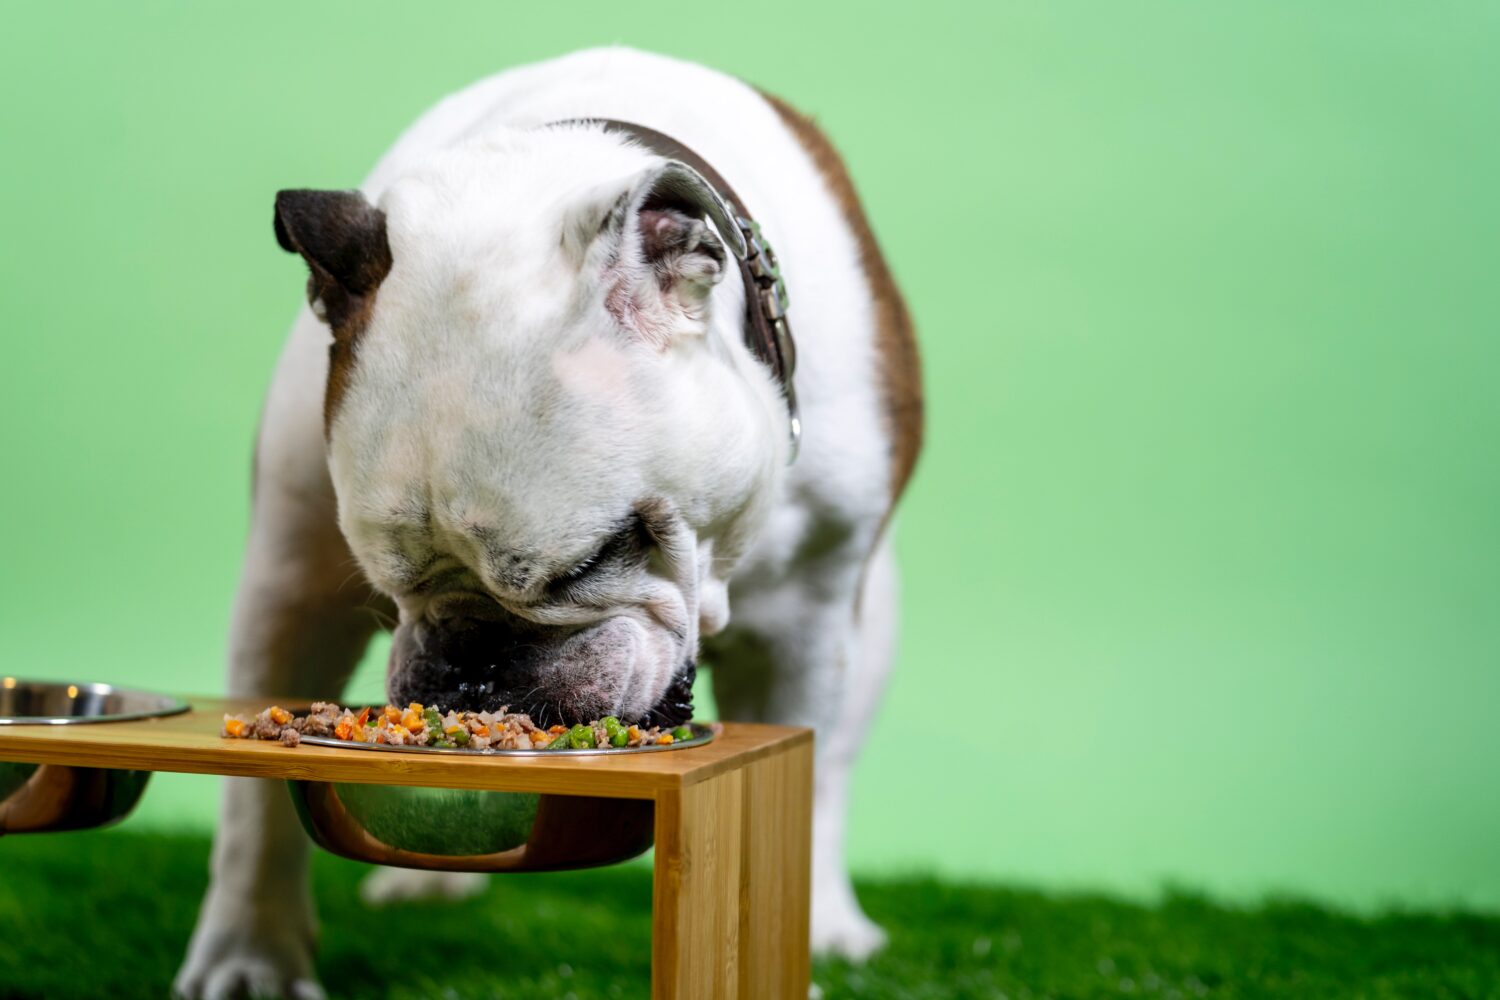 Can Dogs Eat Vegetables? Separating Fact from Fiction When It Comes to Feeding Your Pup